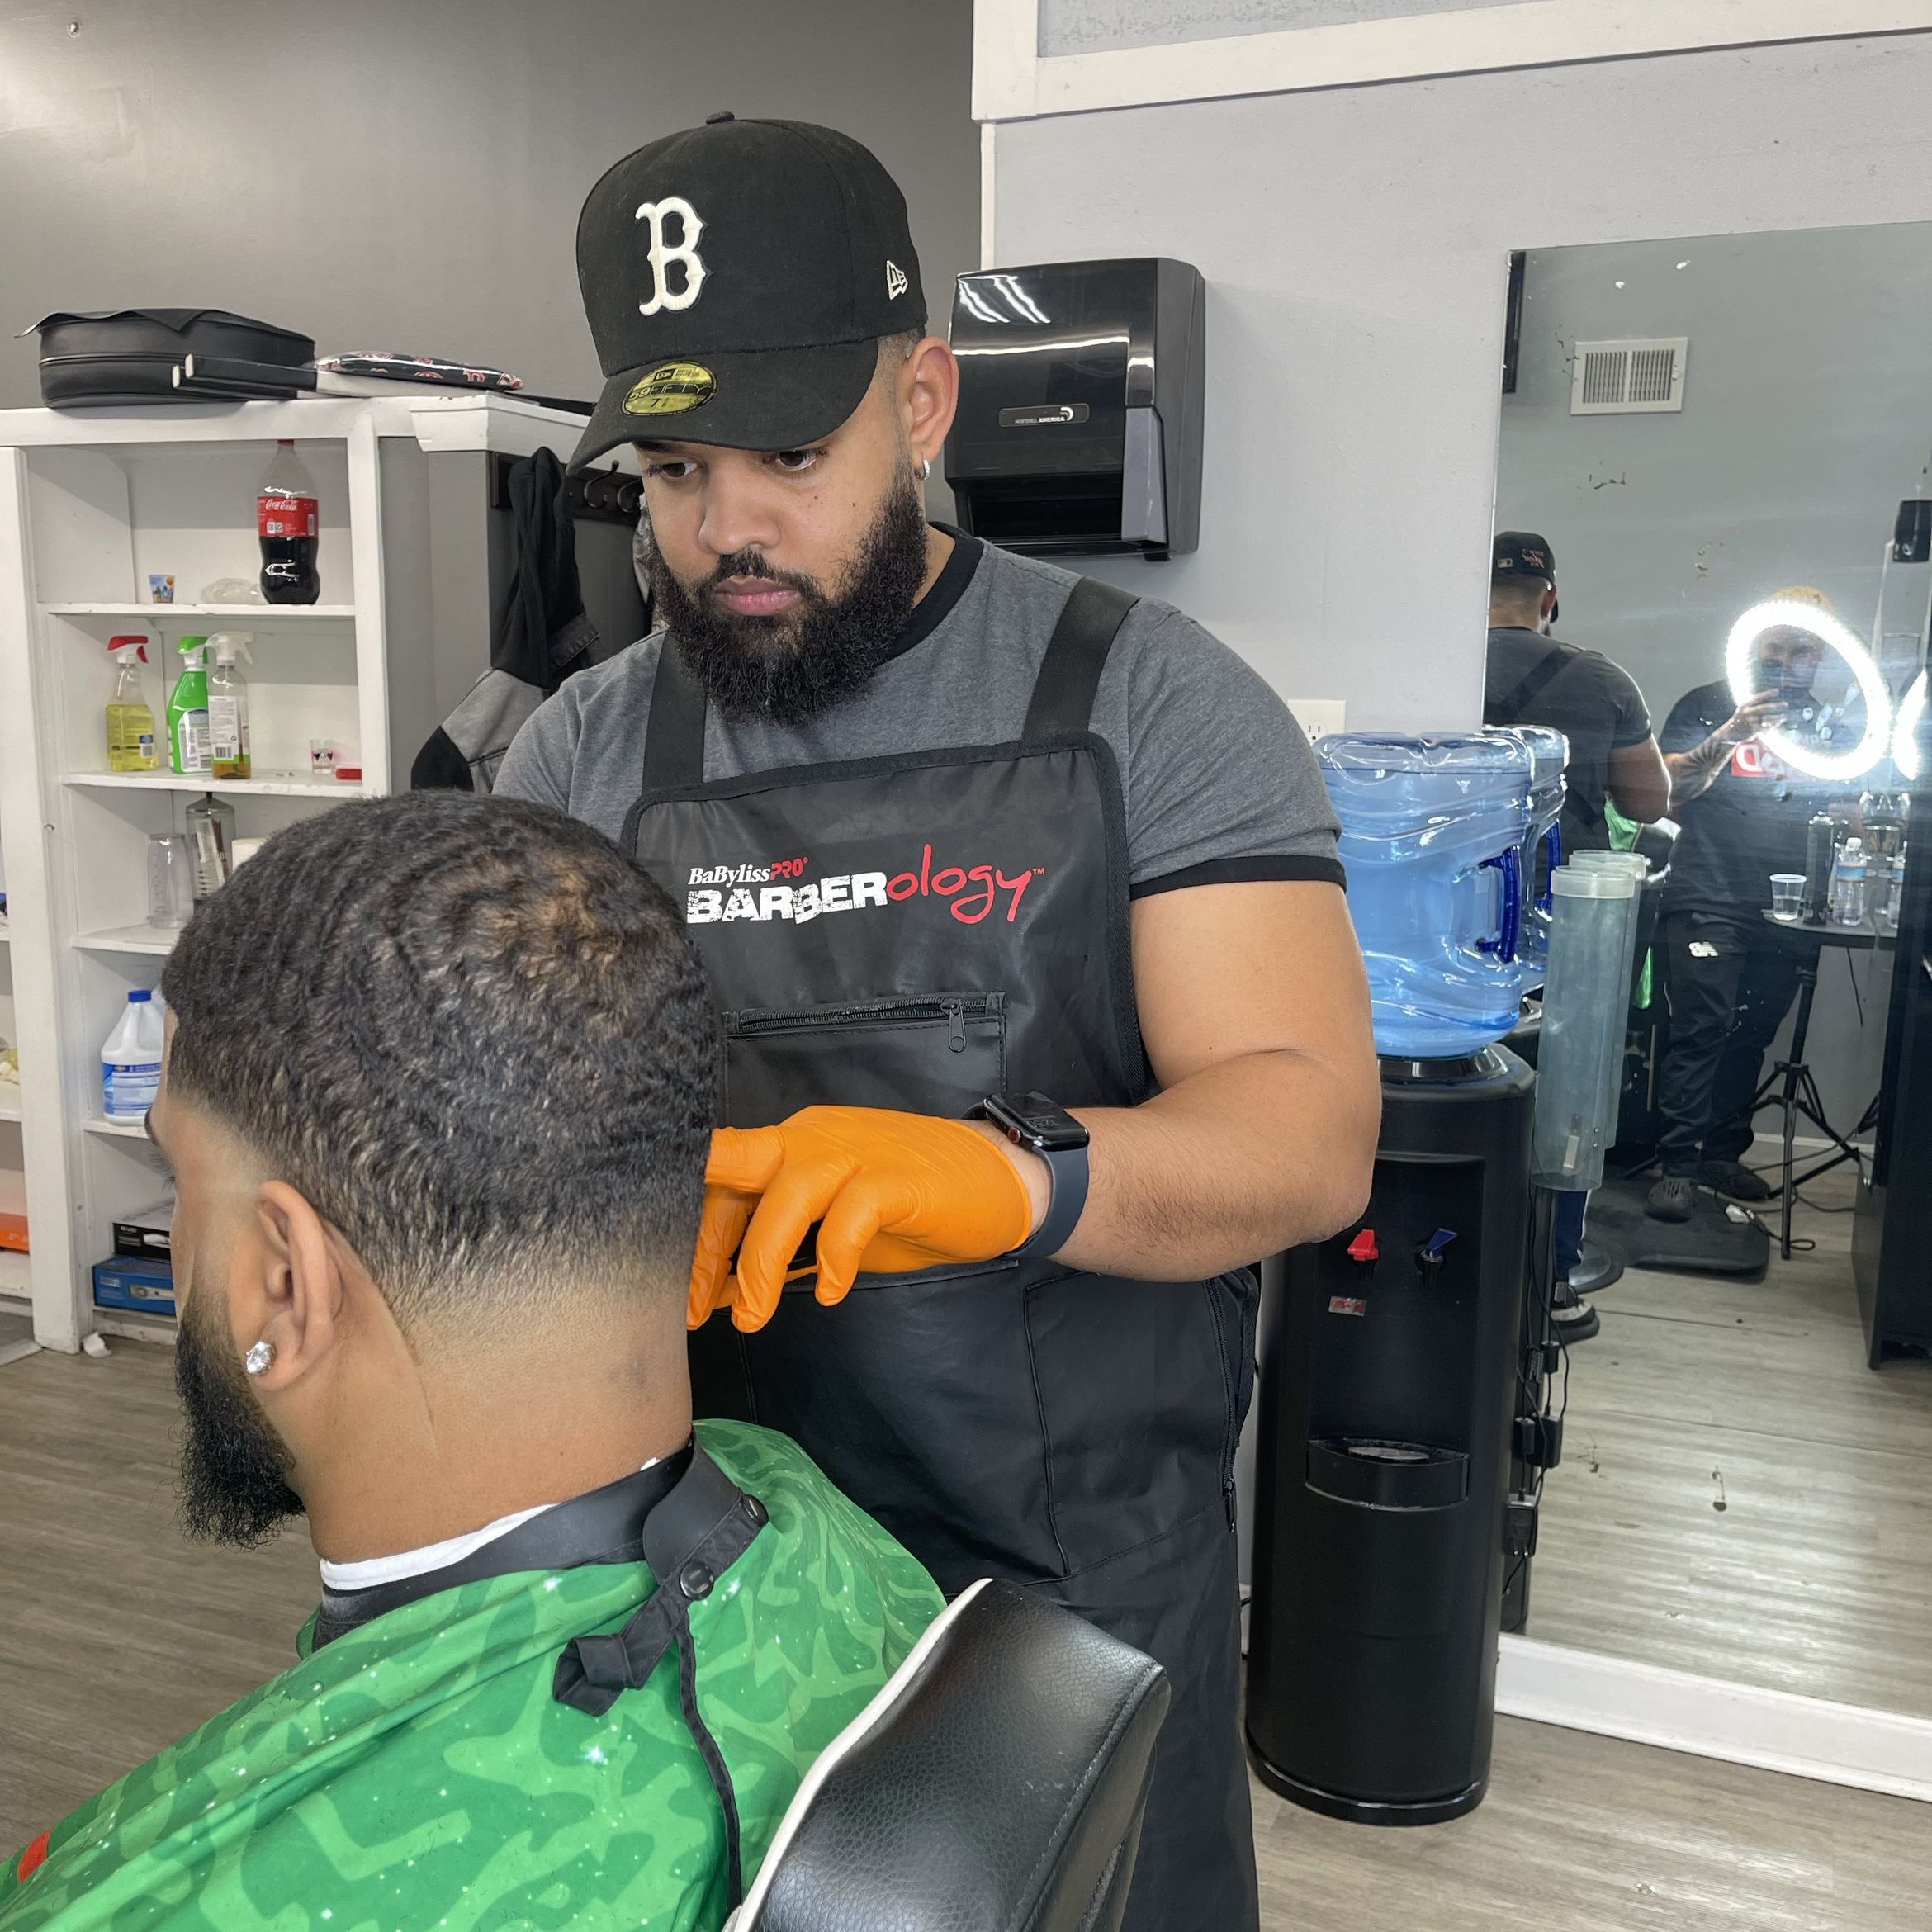 Any taper and haircut with beard 🧔‍♂️ portfolio